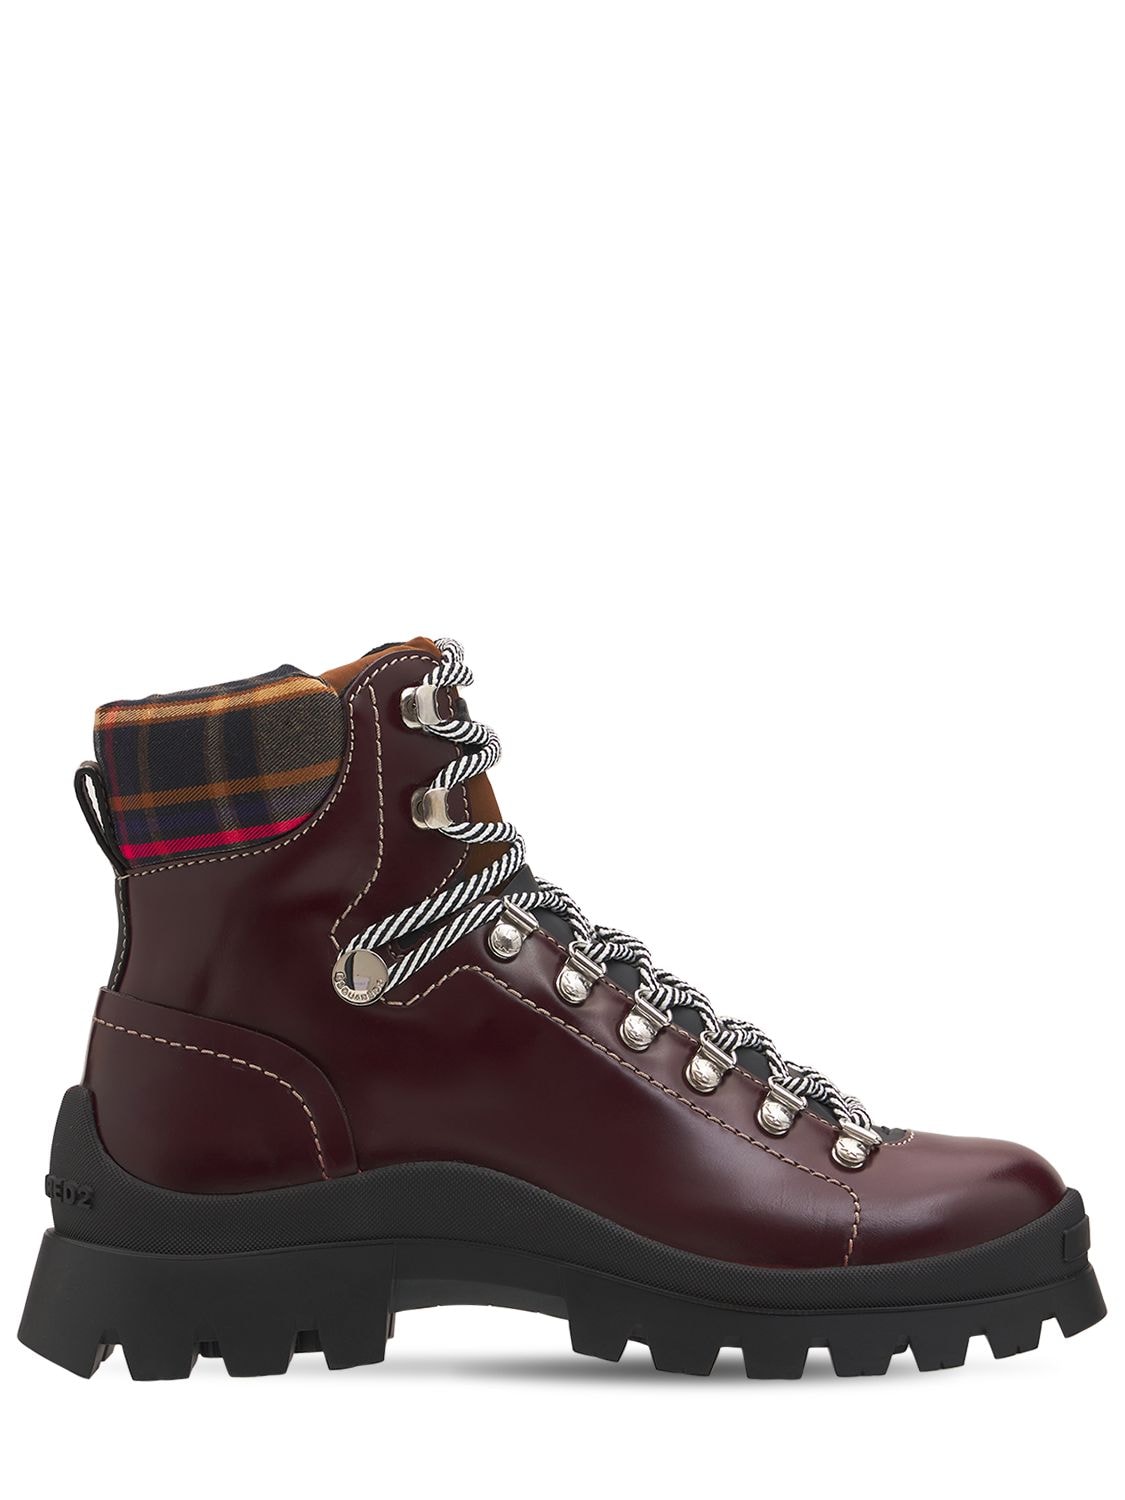 Brushed Leather Tank Hiking Boots